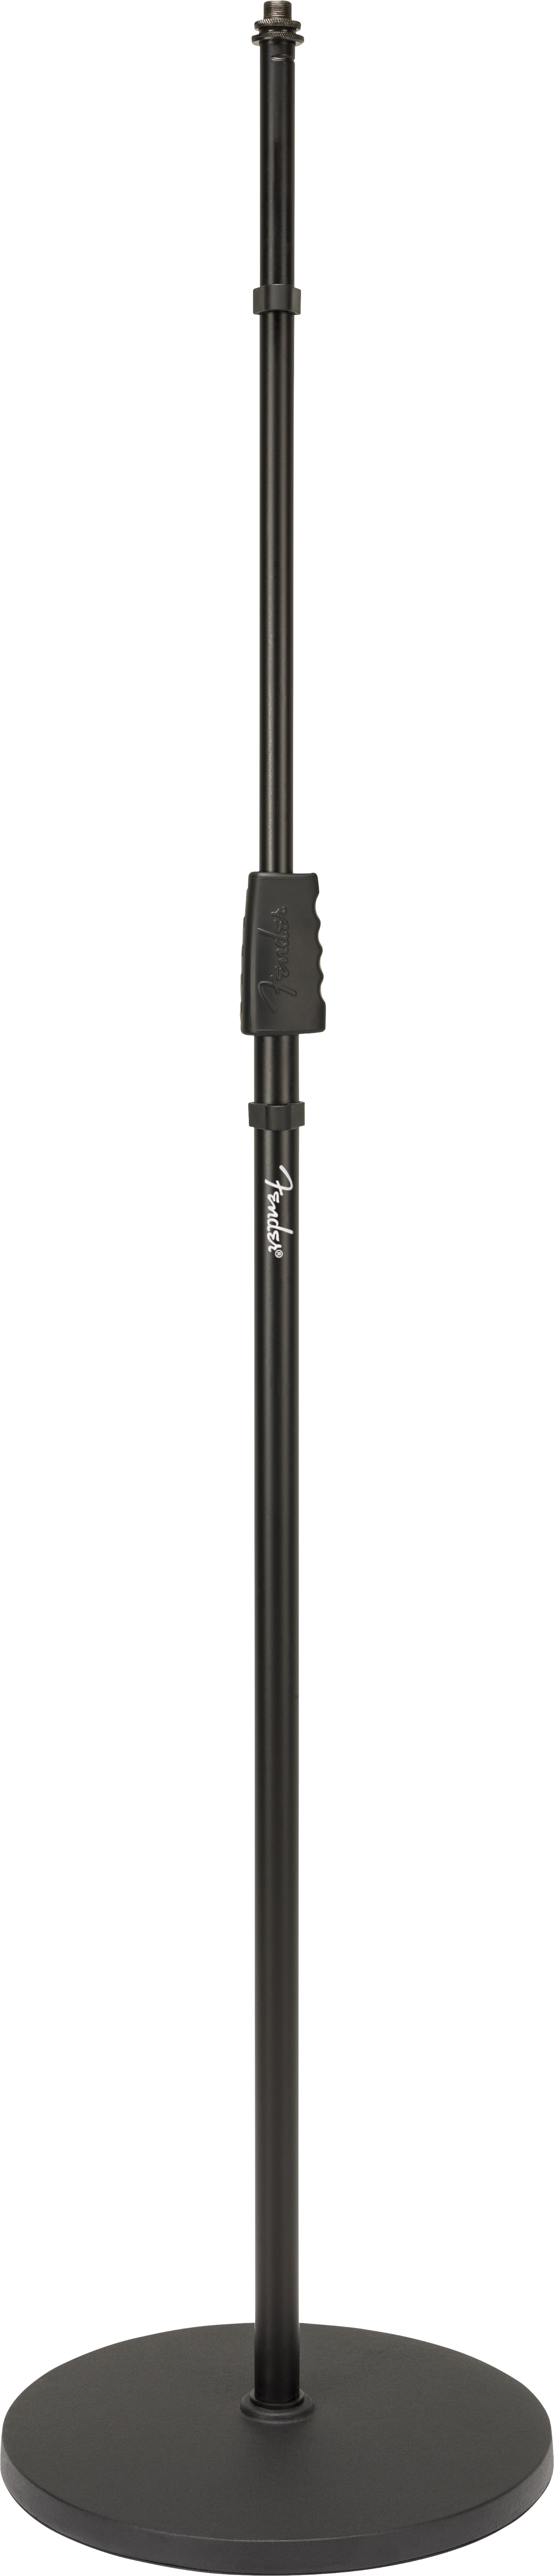 FENDER -  Round Base Microphone Stand